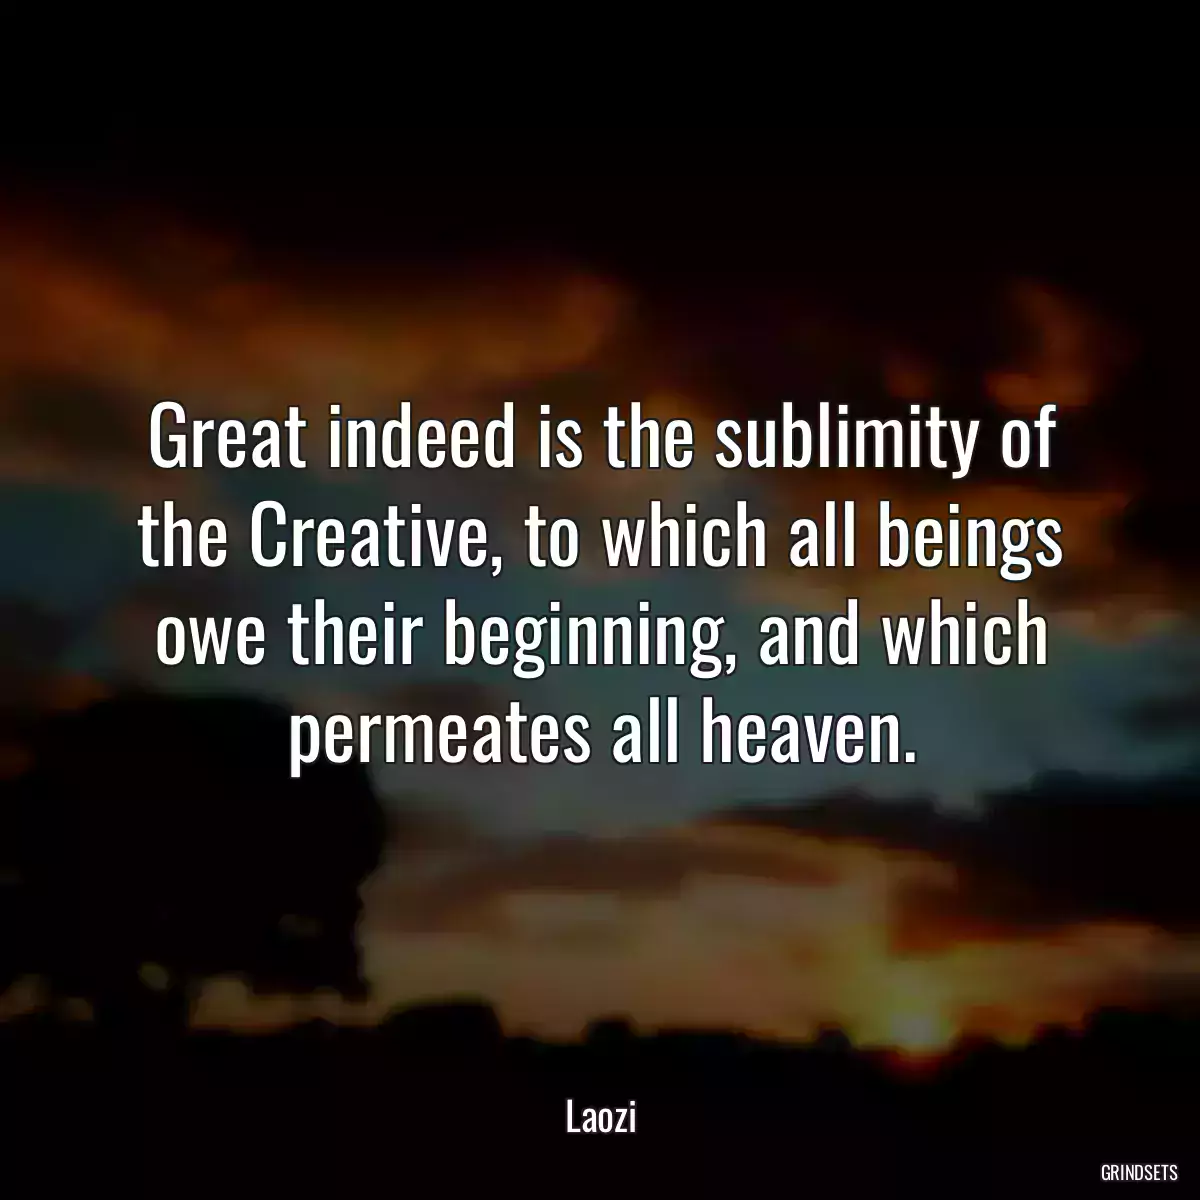 Great indeed is the sublimity of the Creative, to which all beings owe their beginning, and which permeates all heaven.